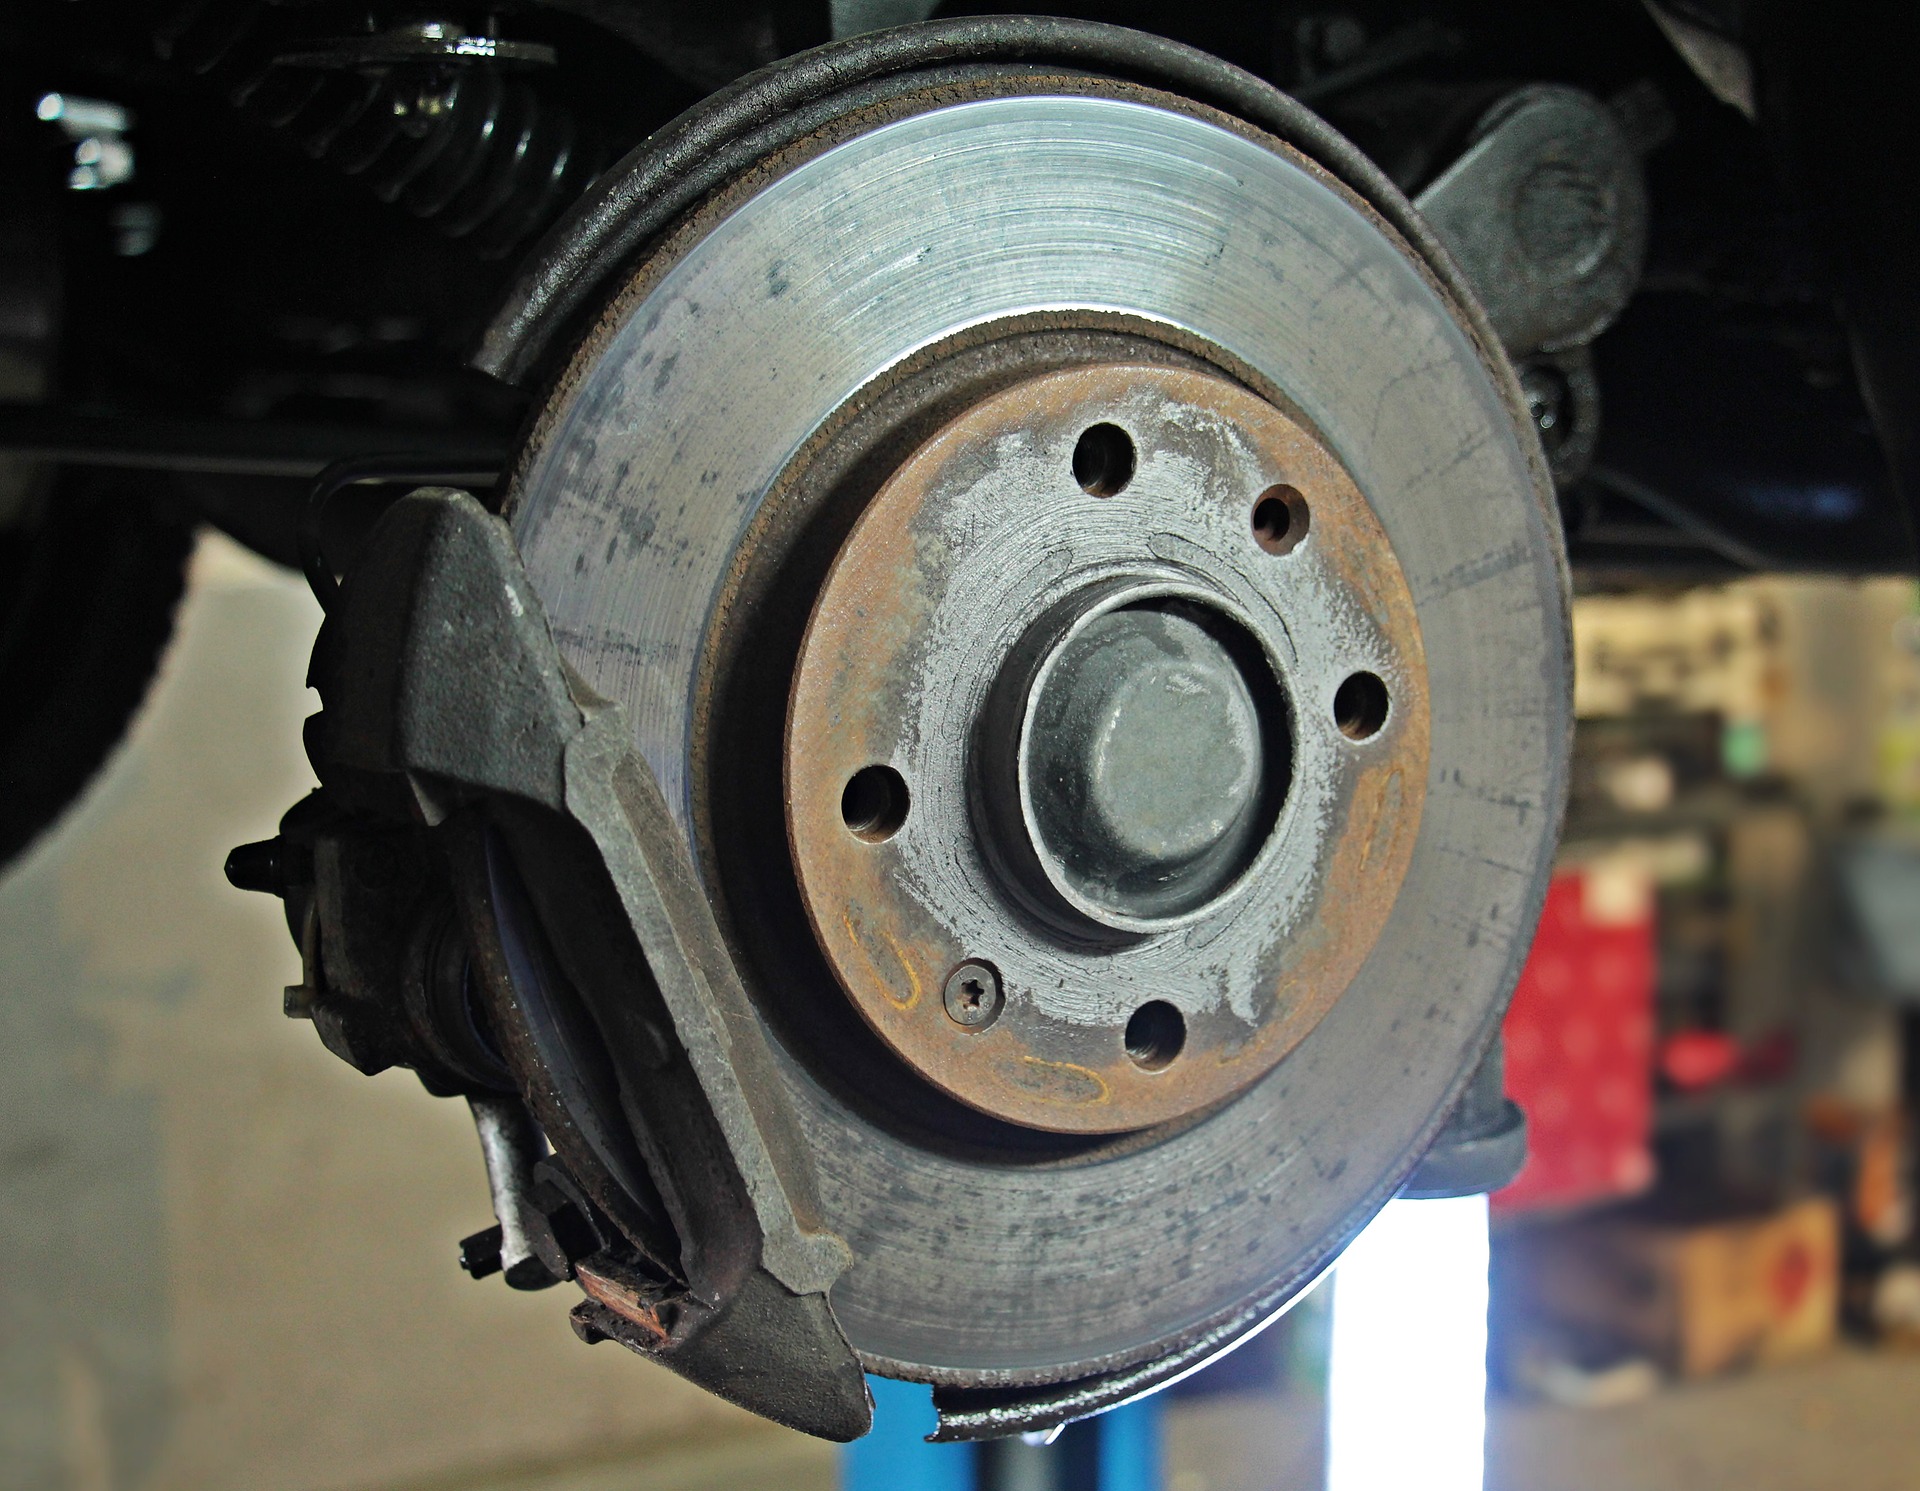 A car's wheel being repaired in an auto shop